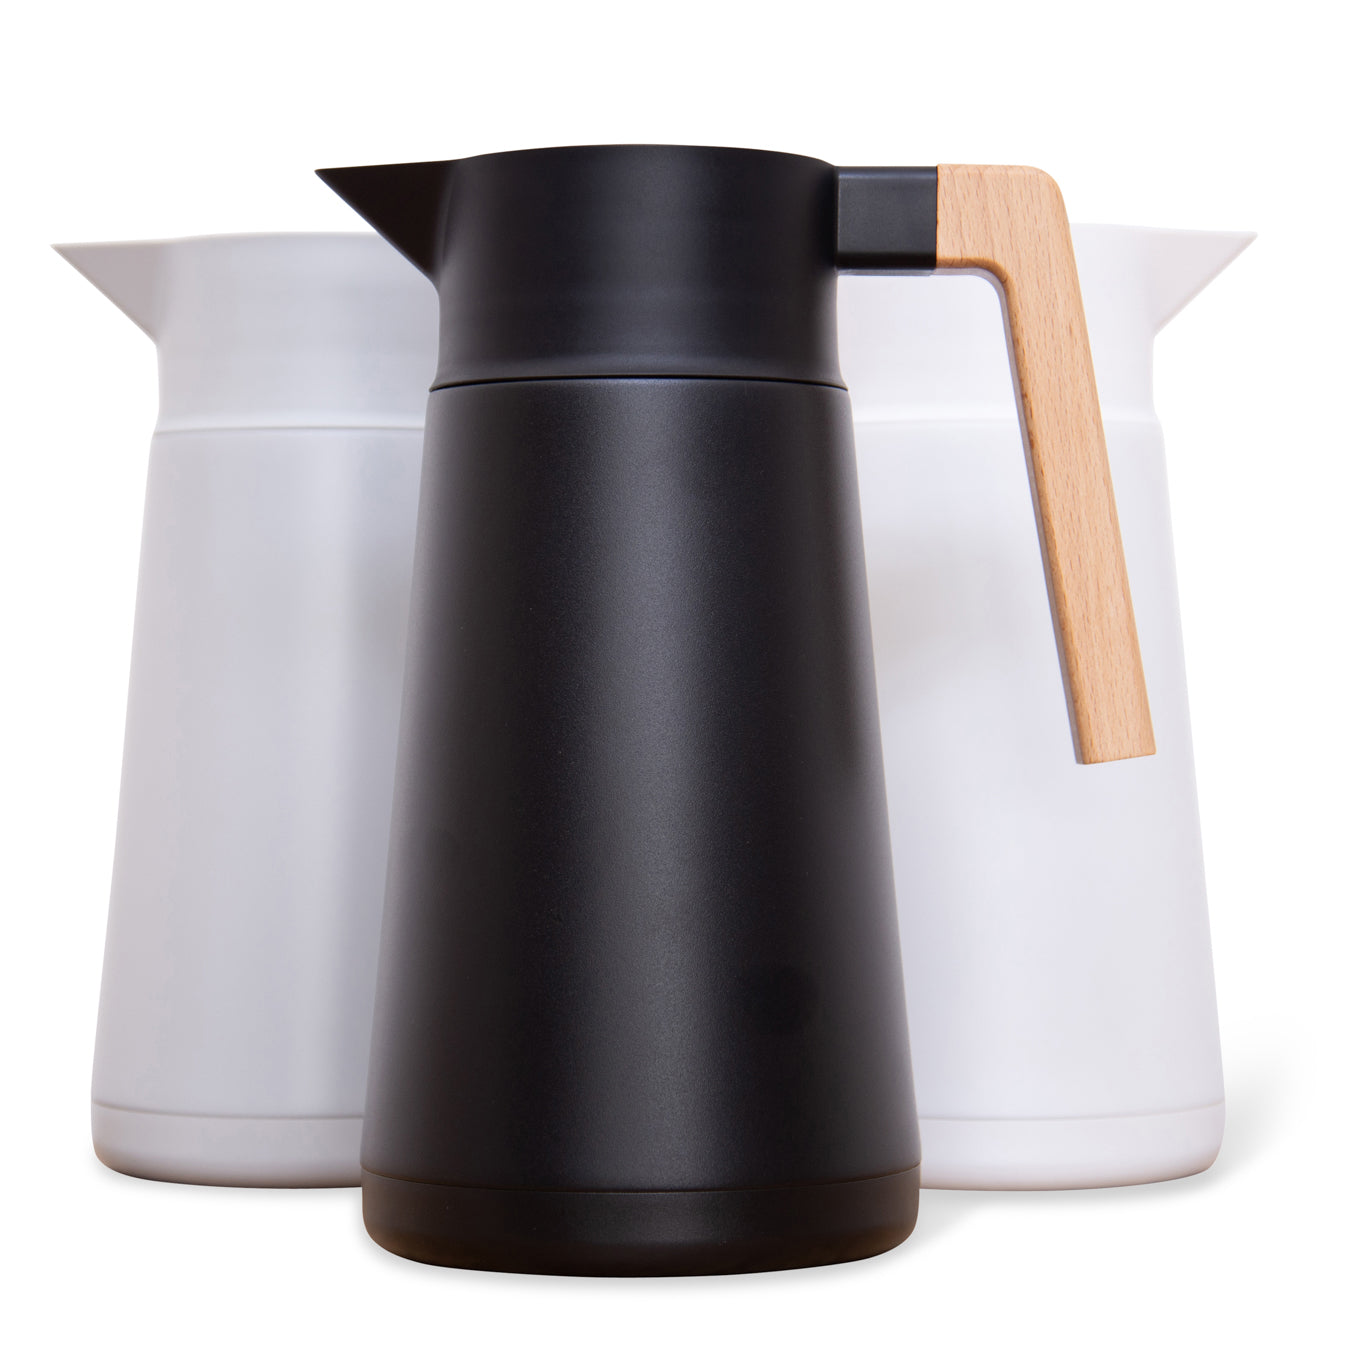 Beverage Carafe — The Amend collective